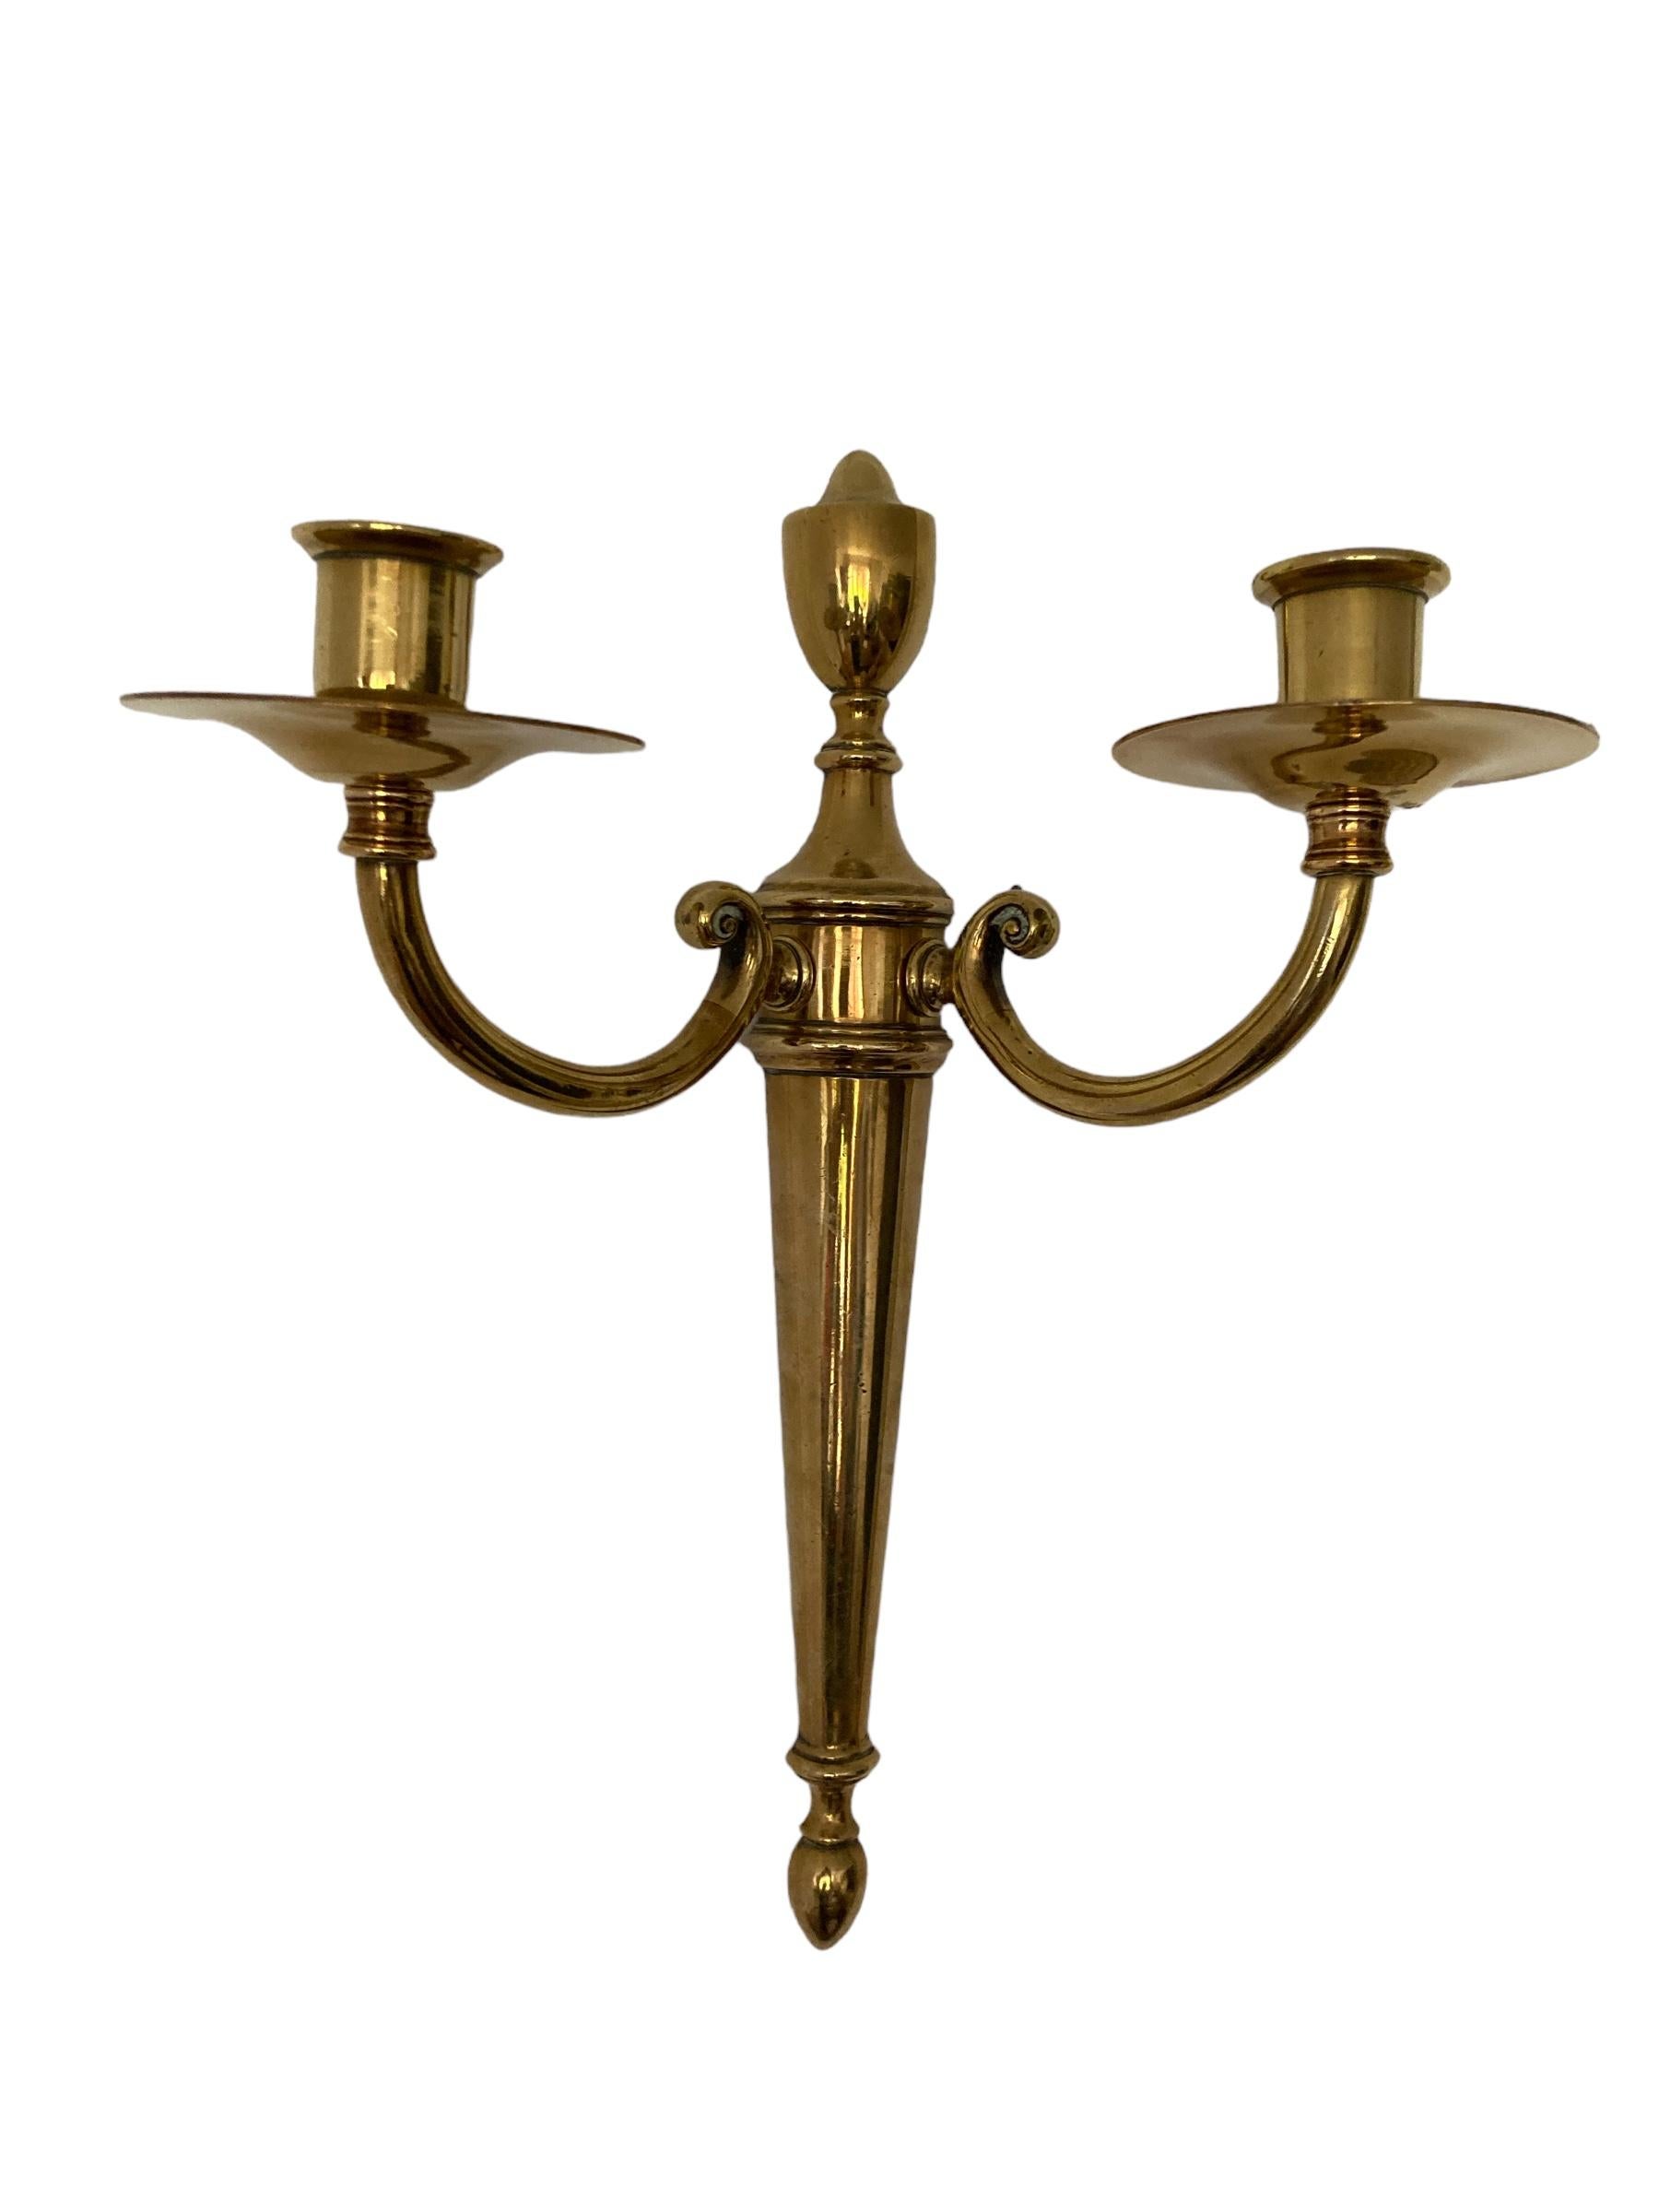 A Pair of Vintage Brass Candle Holder Wall Sconces. Enhance the ambiance of your living space with these elegant brass candlestick Holders. Featuring ywo arms each. Crafted with attention to detail, they exude a timeless charm that will complement